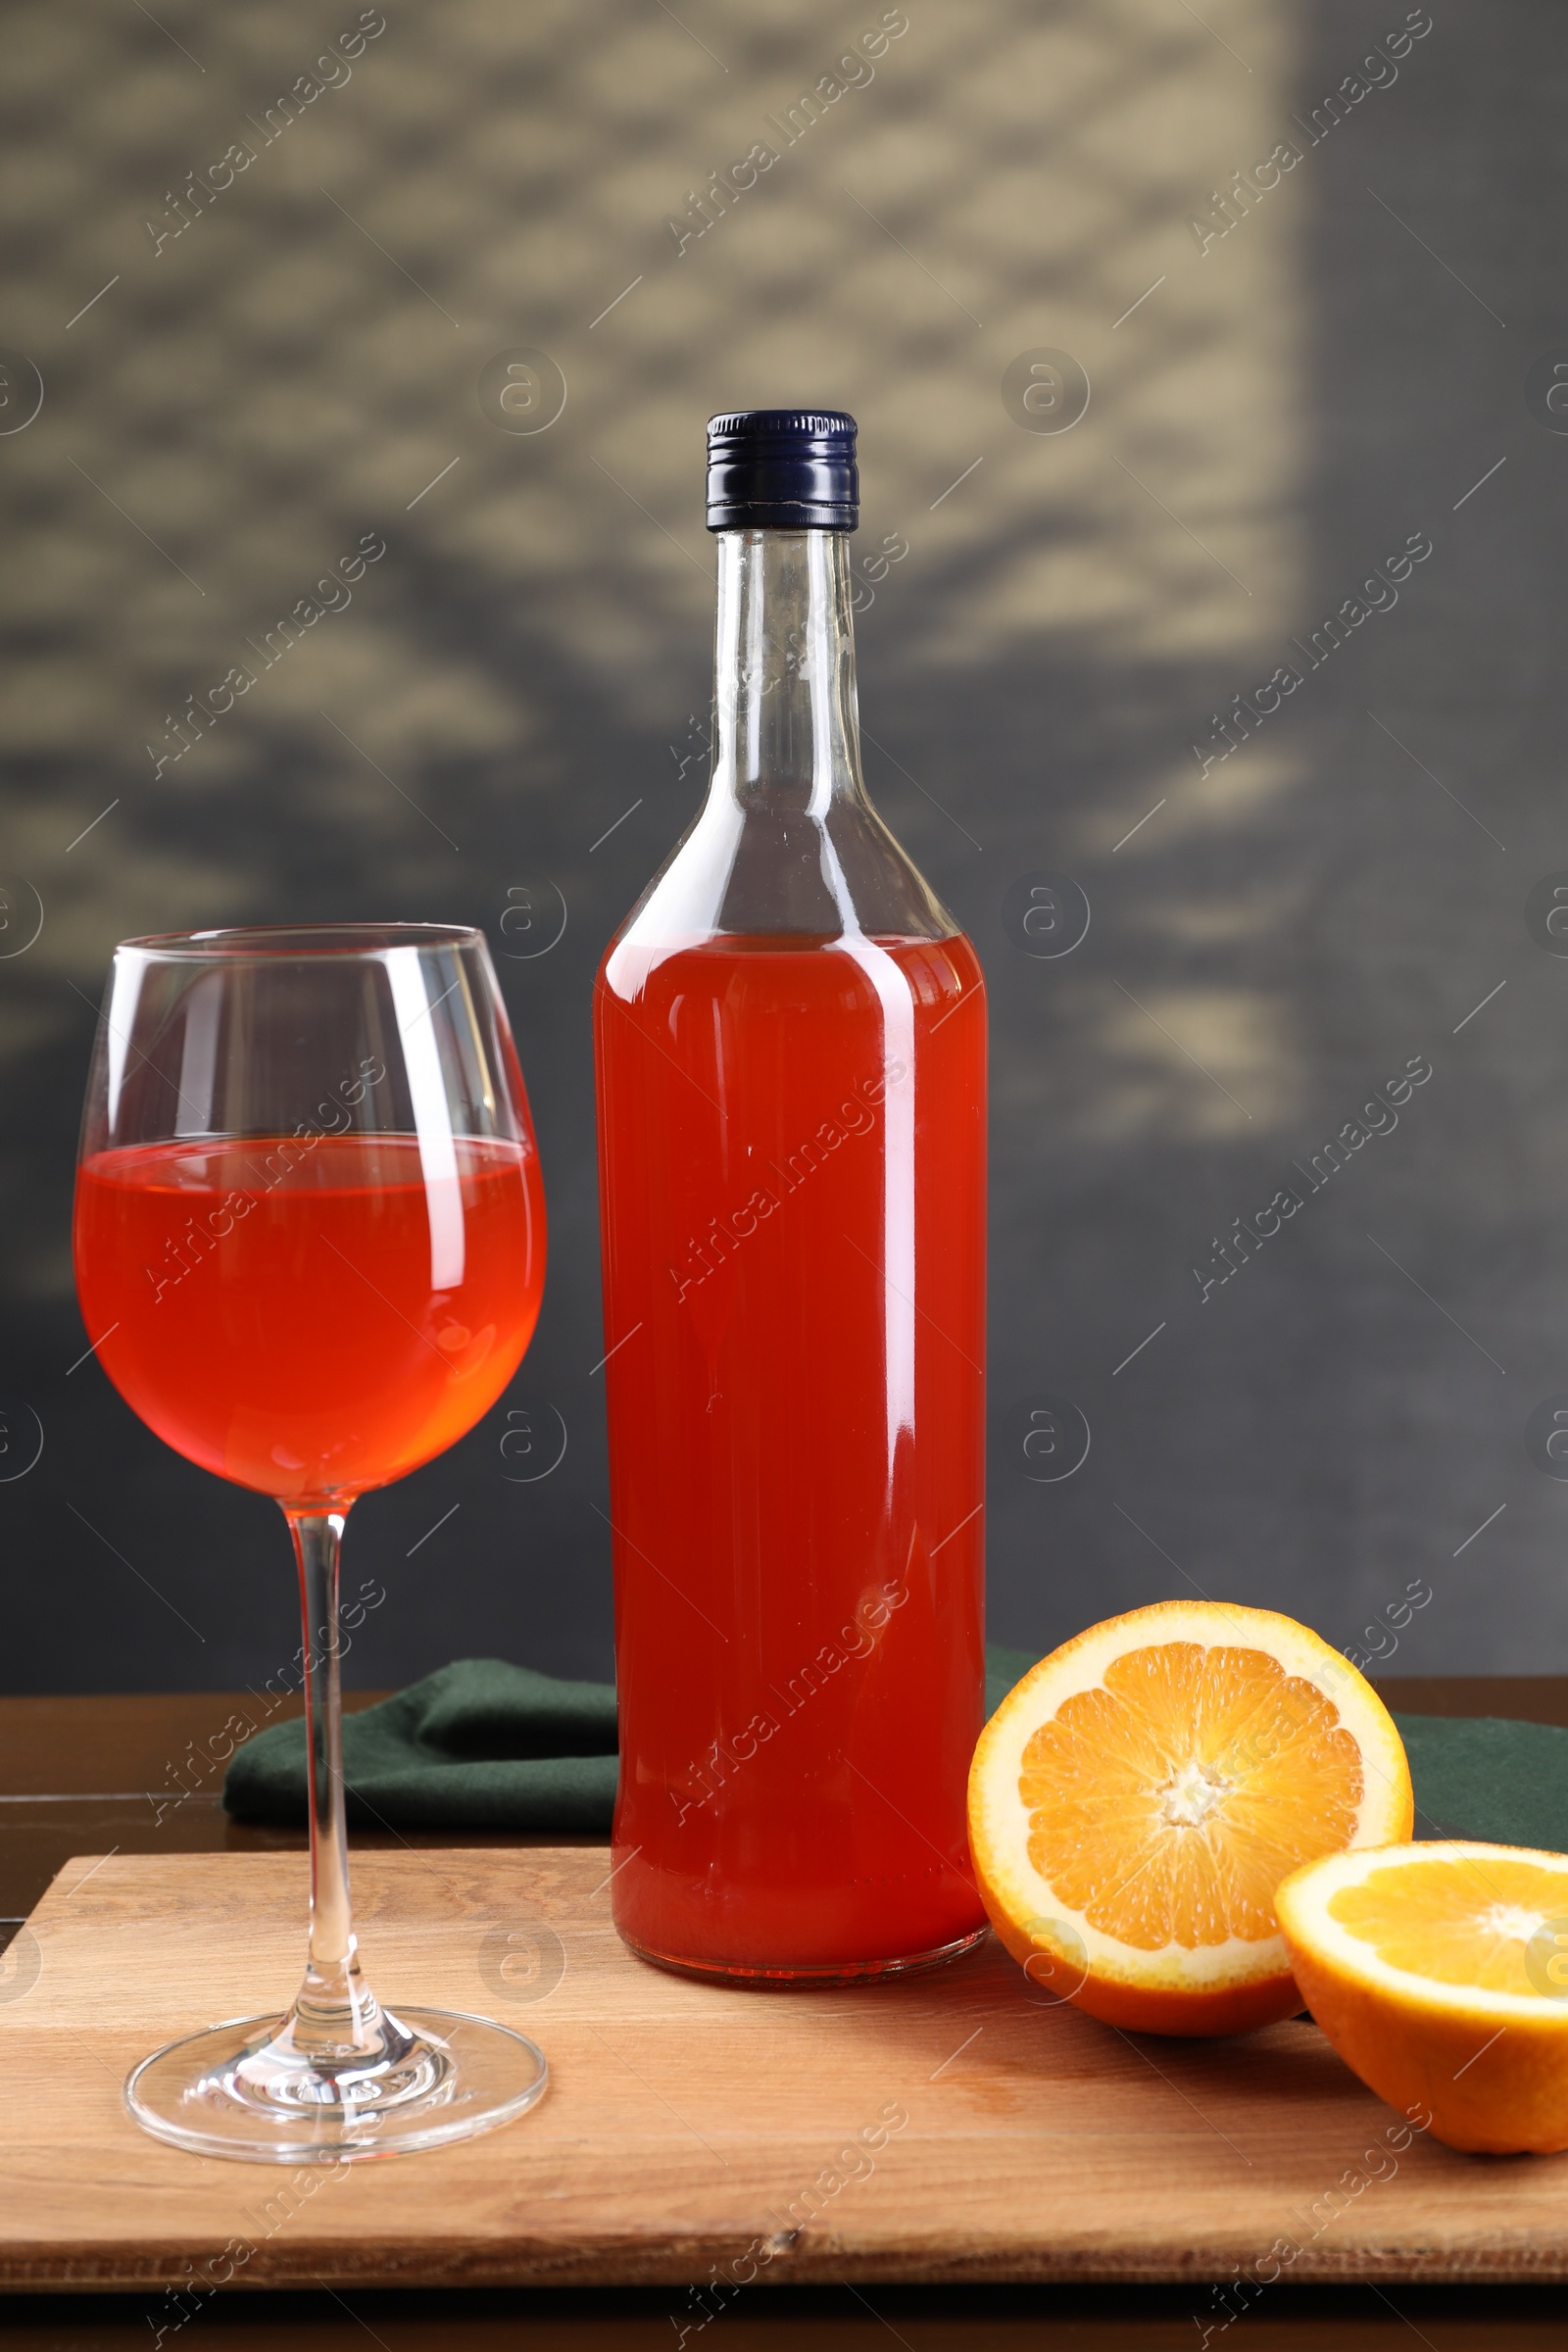 Photo of Aperol spritz cocktail in glass and bottle on wooden table